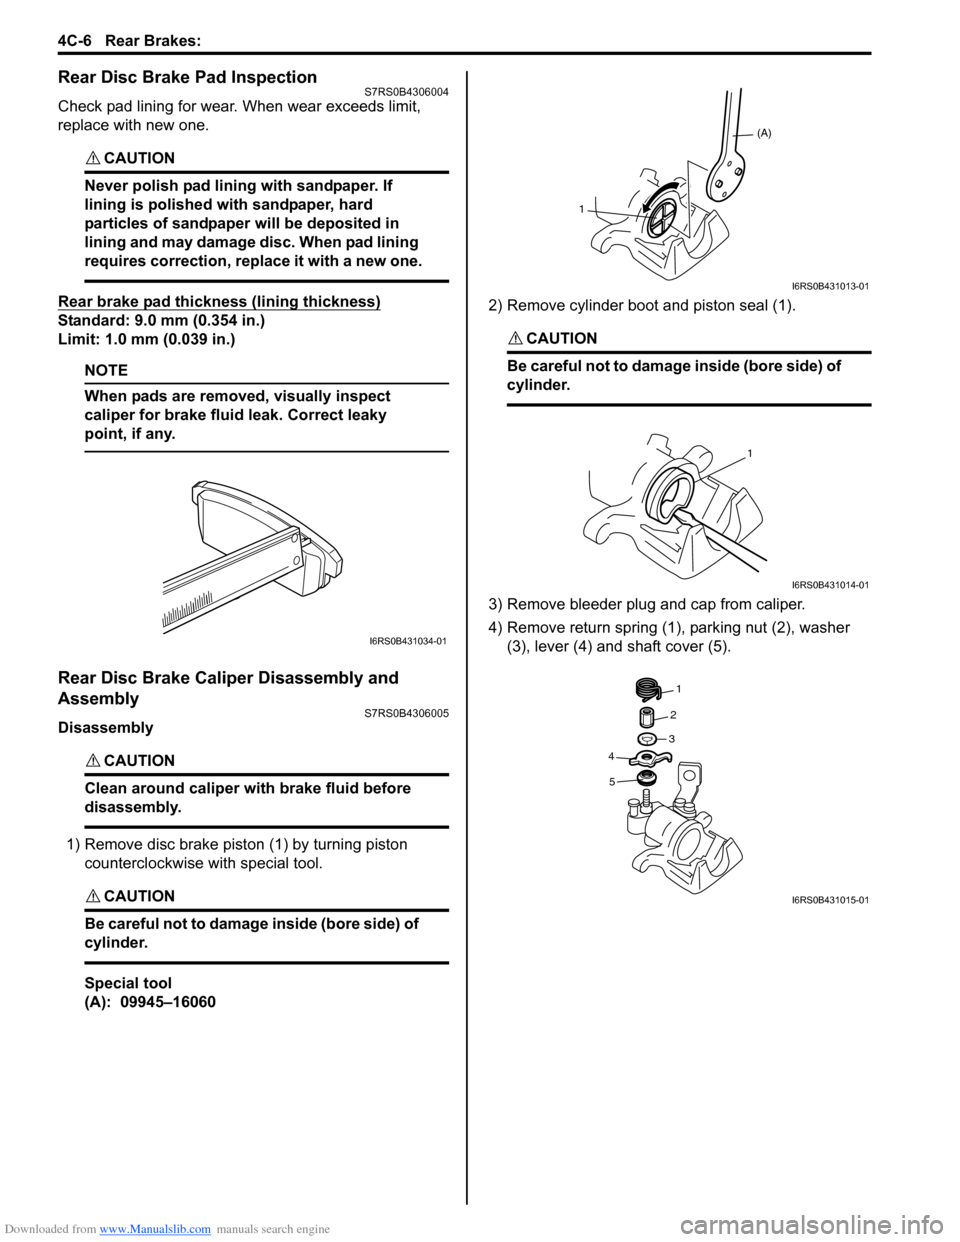 SUZUKI SWIFT 2008 2.G Service Workshop Manual Downloaded from www.Manualslib.com manuals search engine 4C-6 Rear Brakes: 
Rear Disc Brake Pad InspectionS7RS0B4306004
Check pad lining for wear. When wear exceeds limit, 
replace with new one.
CAUTI